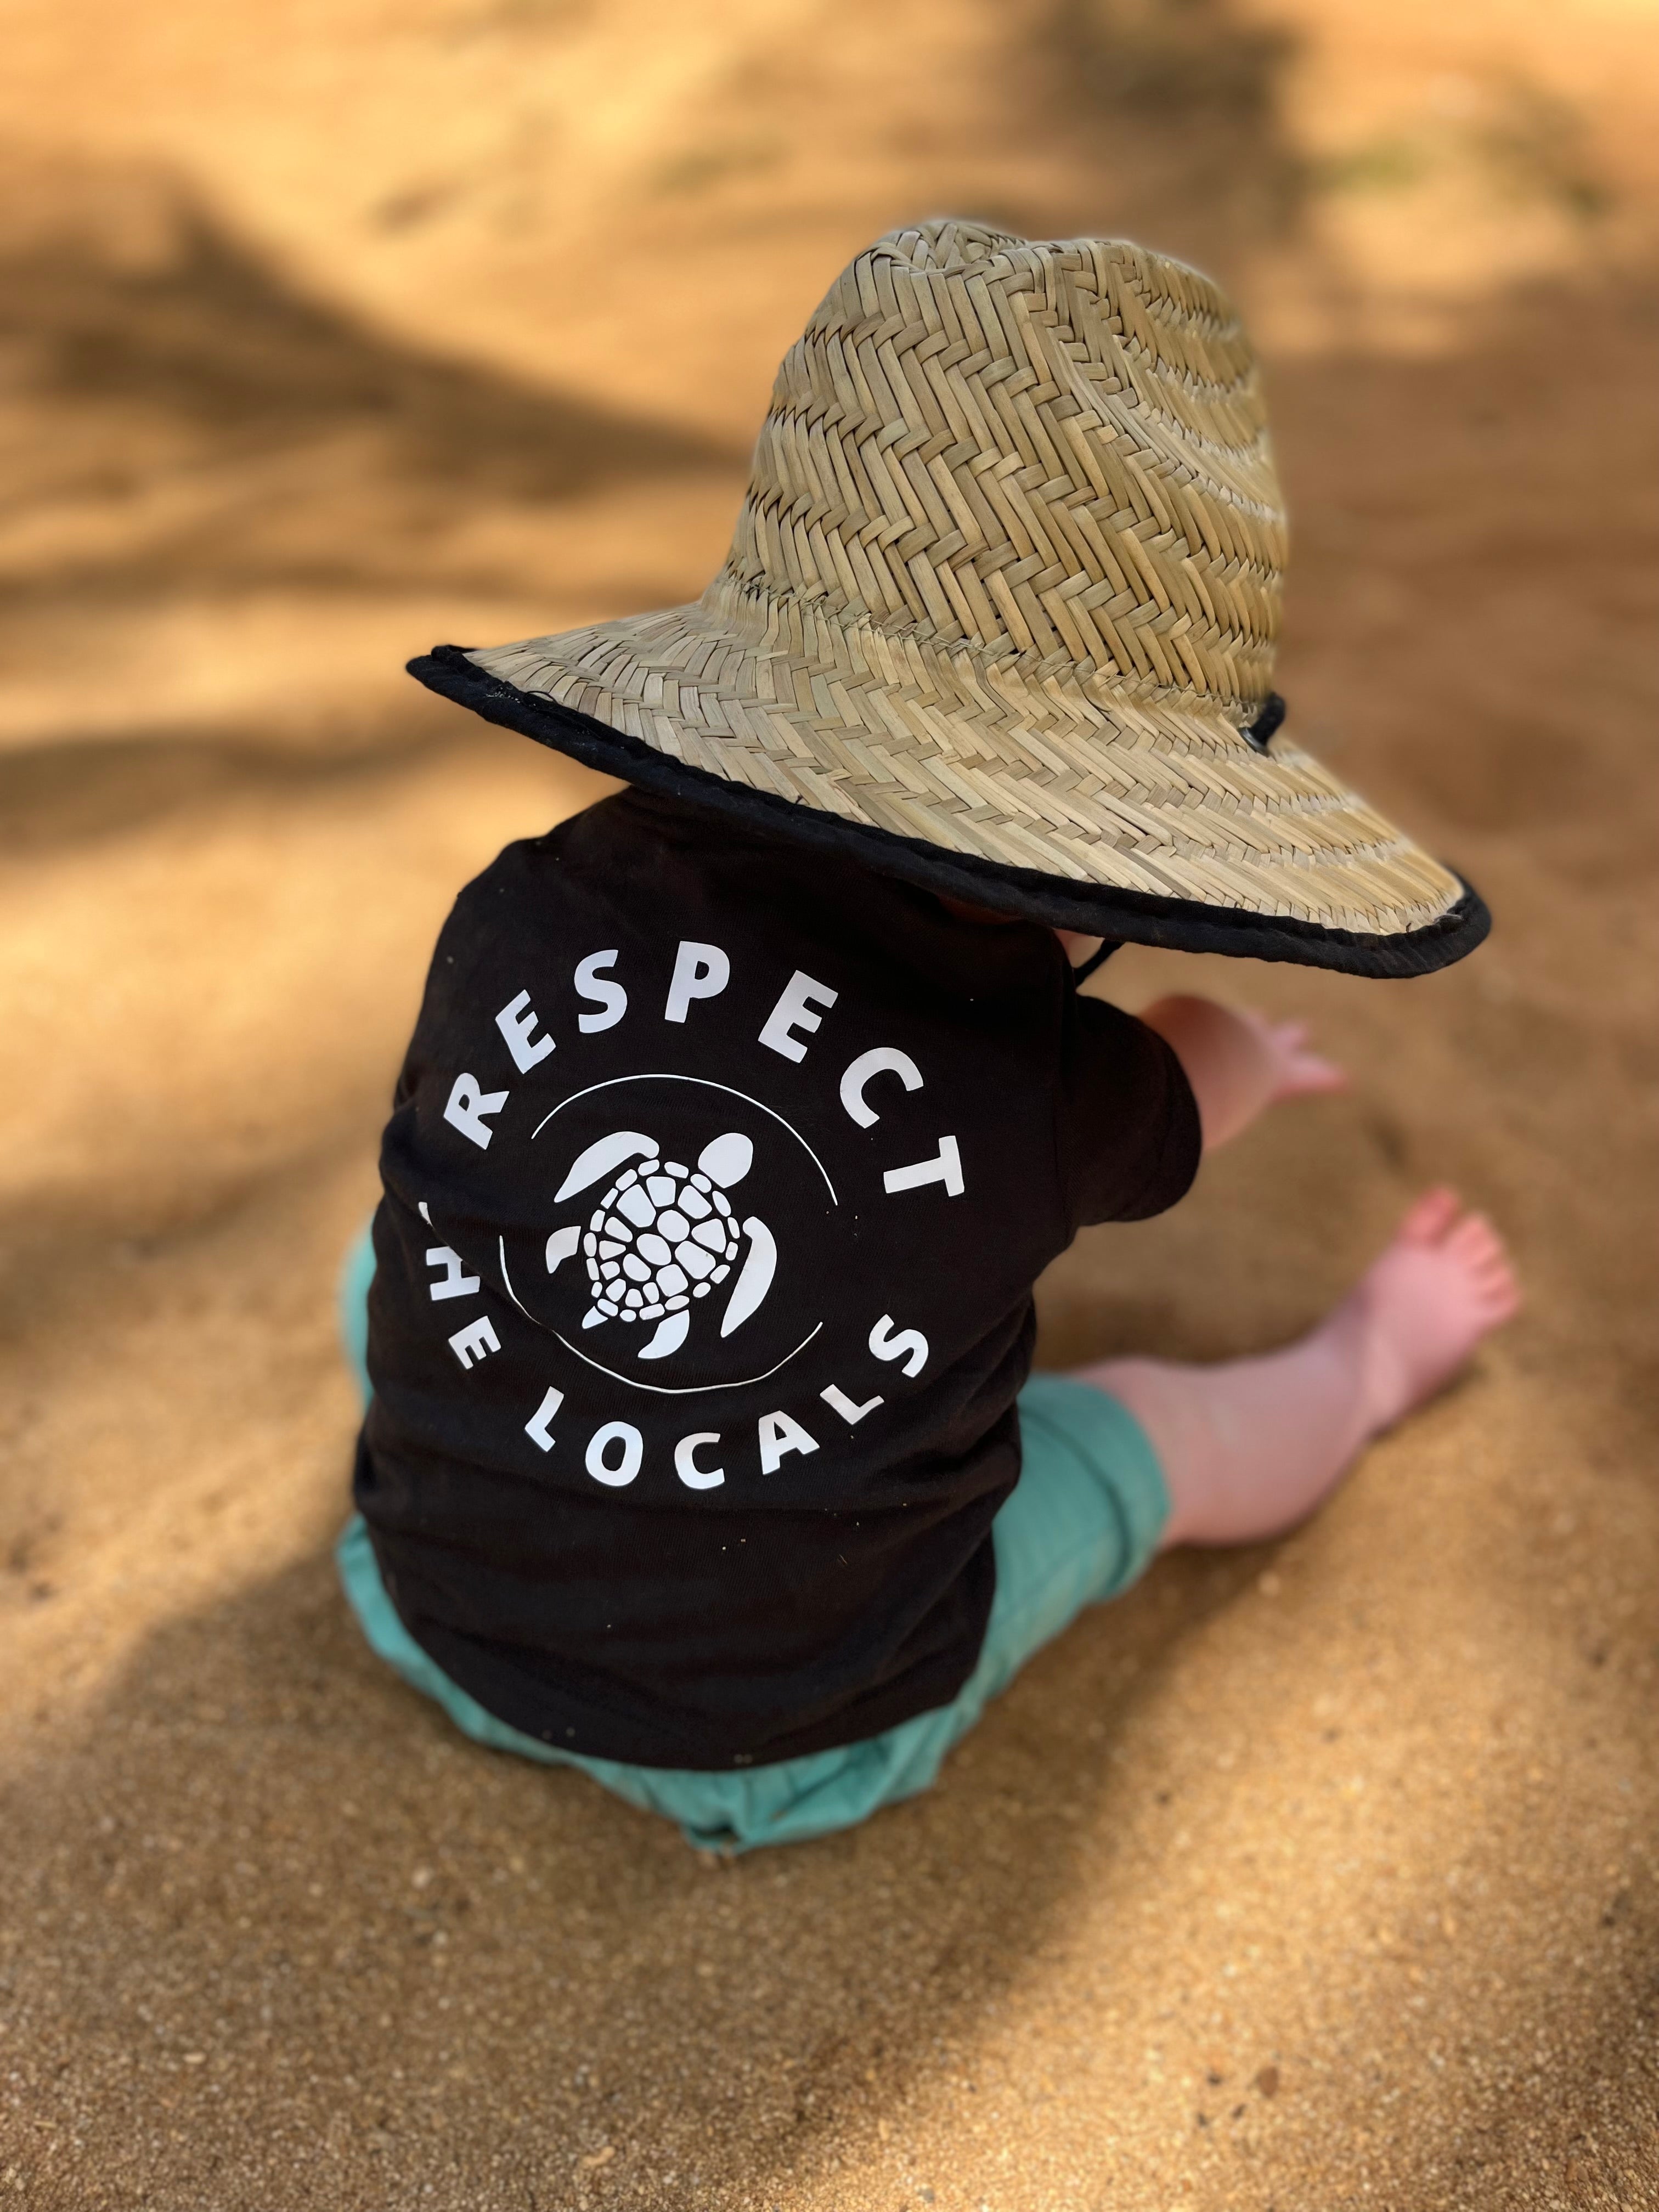 Baby on the beach under some palm trees with a beachy straw sun hat and a stylish respect the local shirt playing in the sand